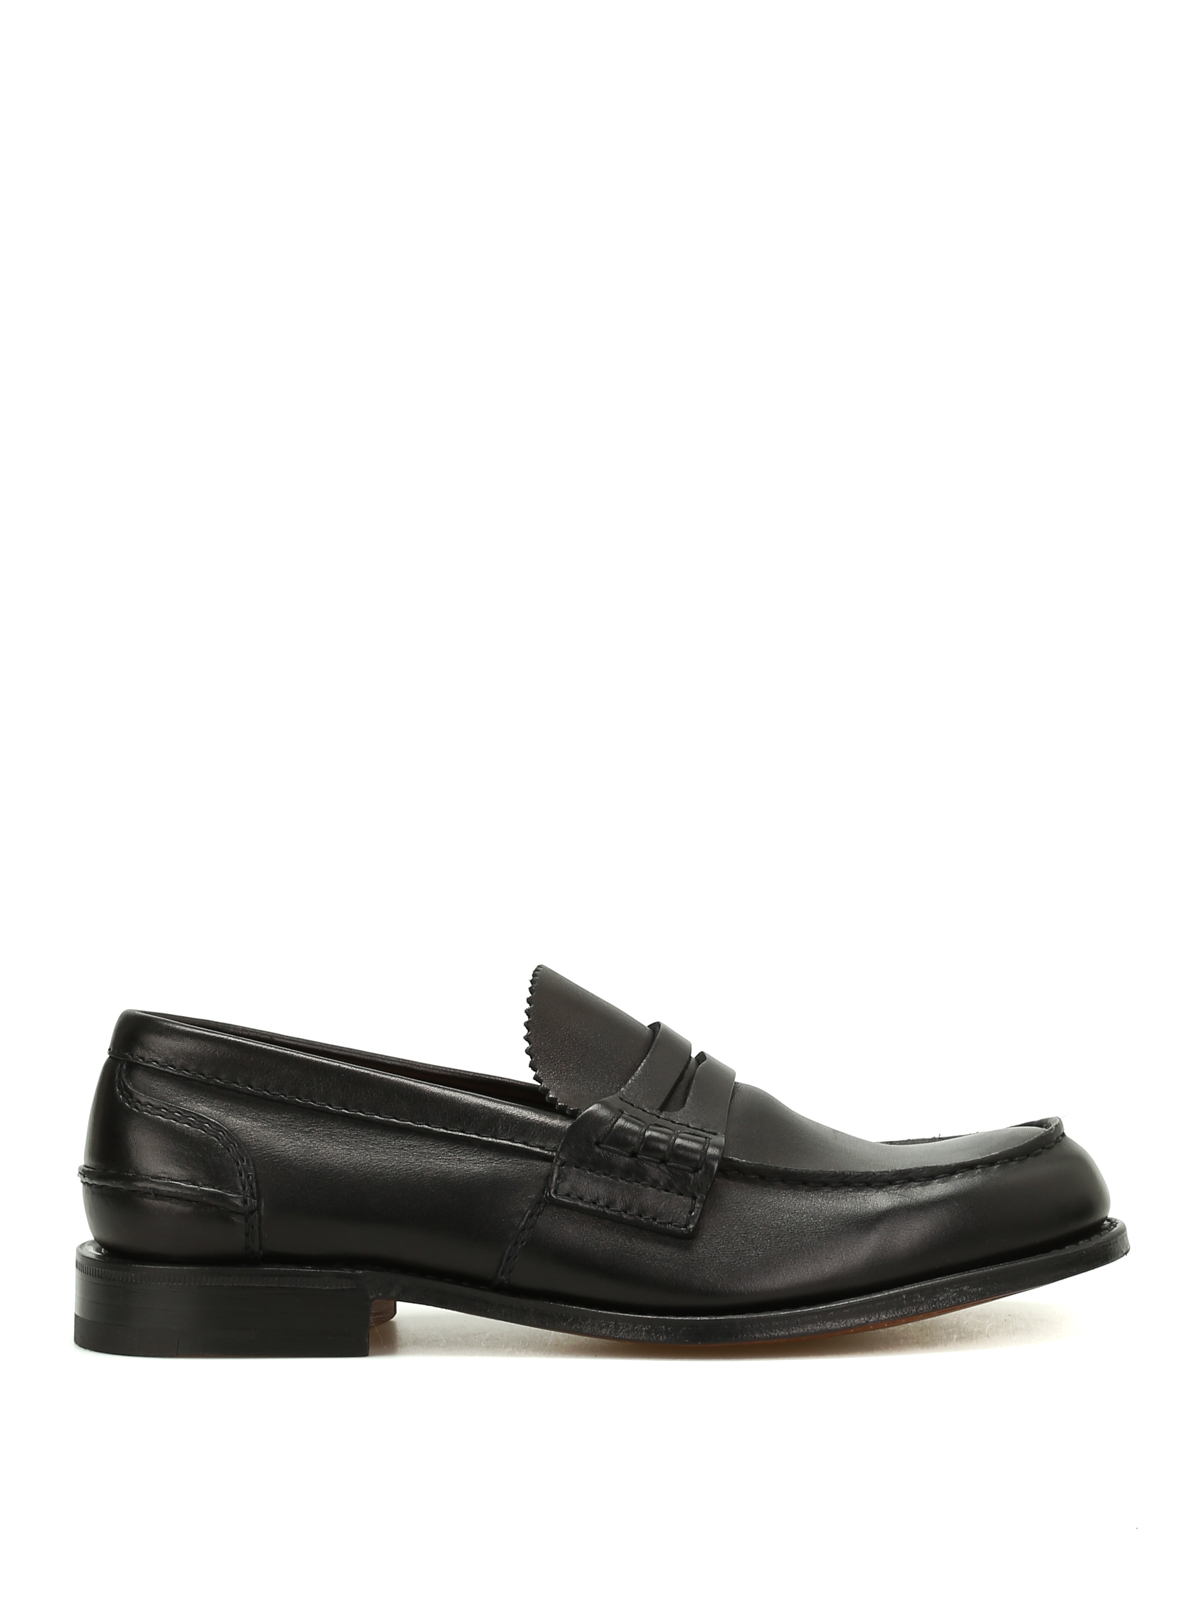 Loafers & Slippers Church's - Pembrey Prestige leather loafers ...